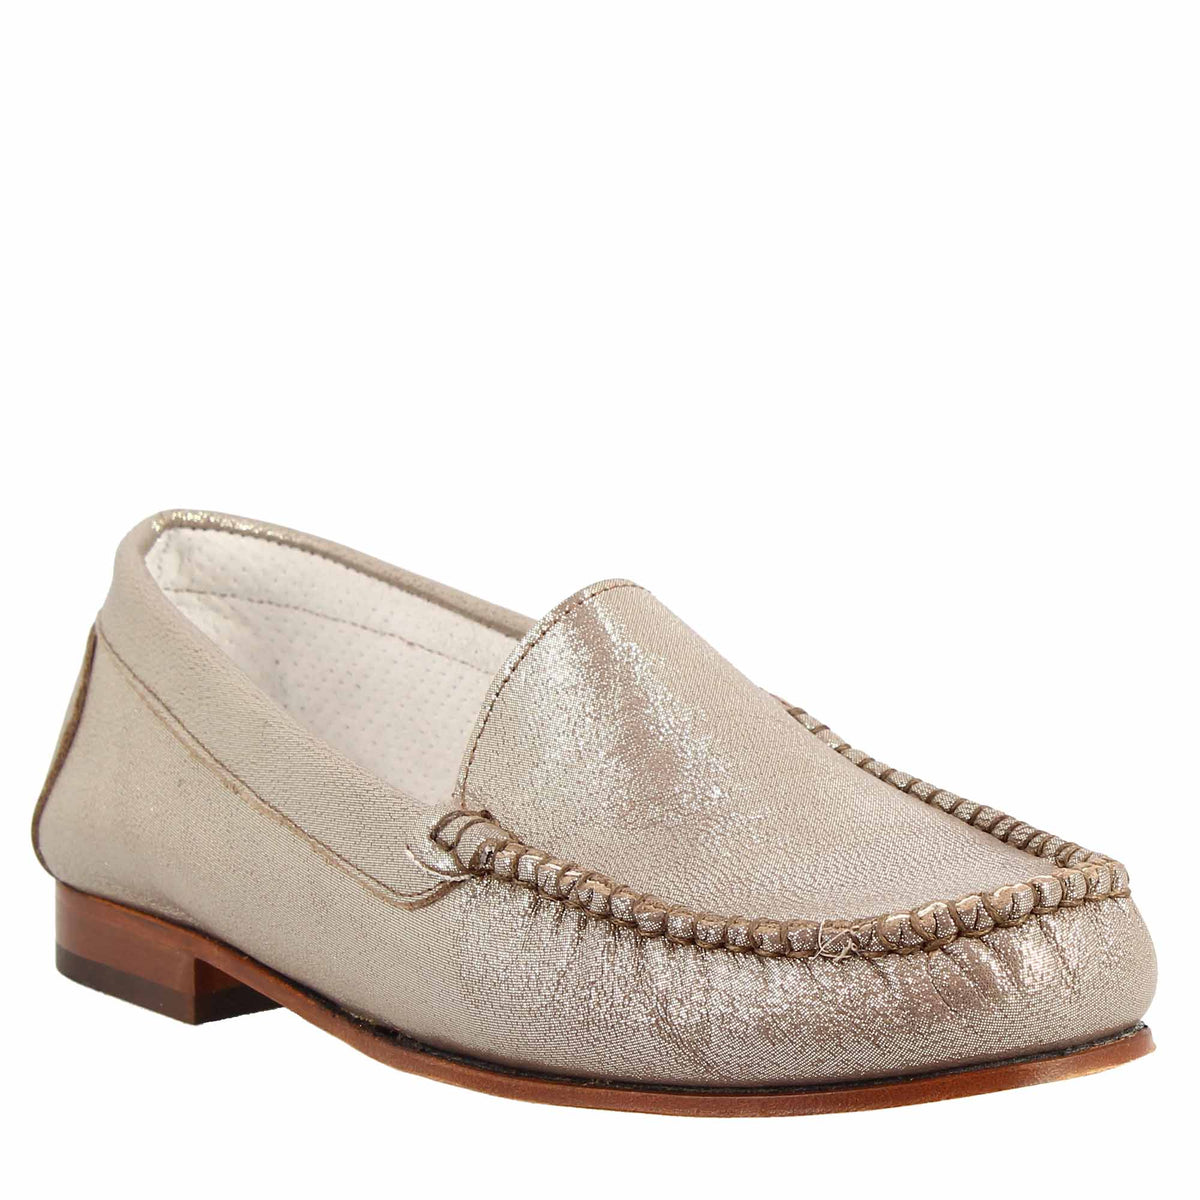 Handmade loafers for women in platinum leather